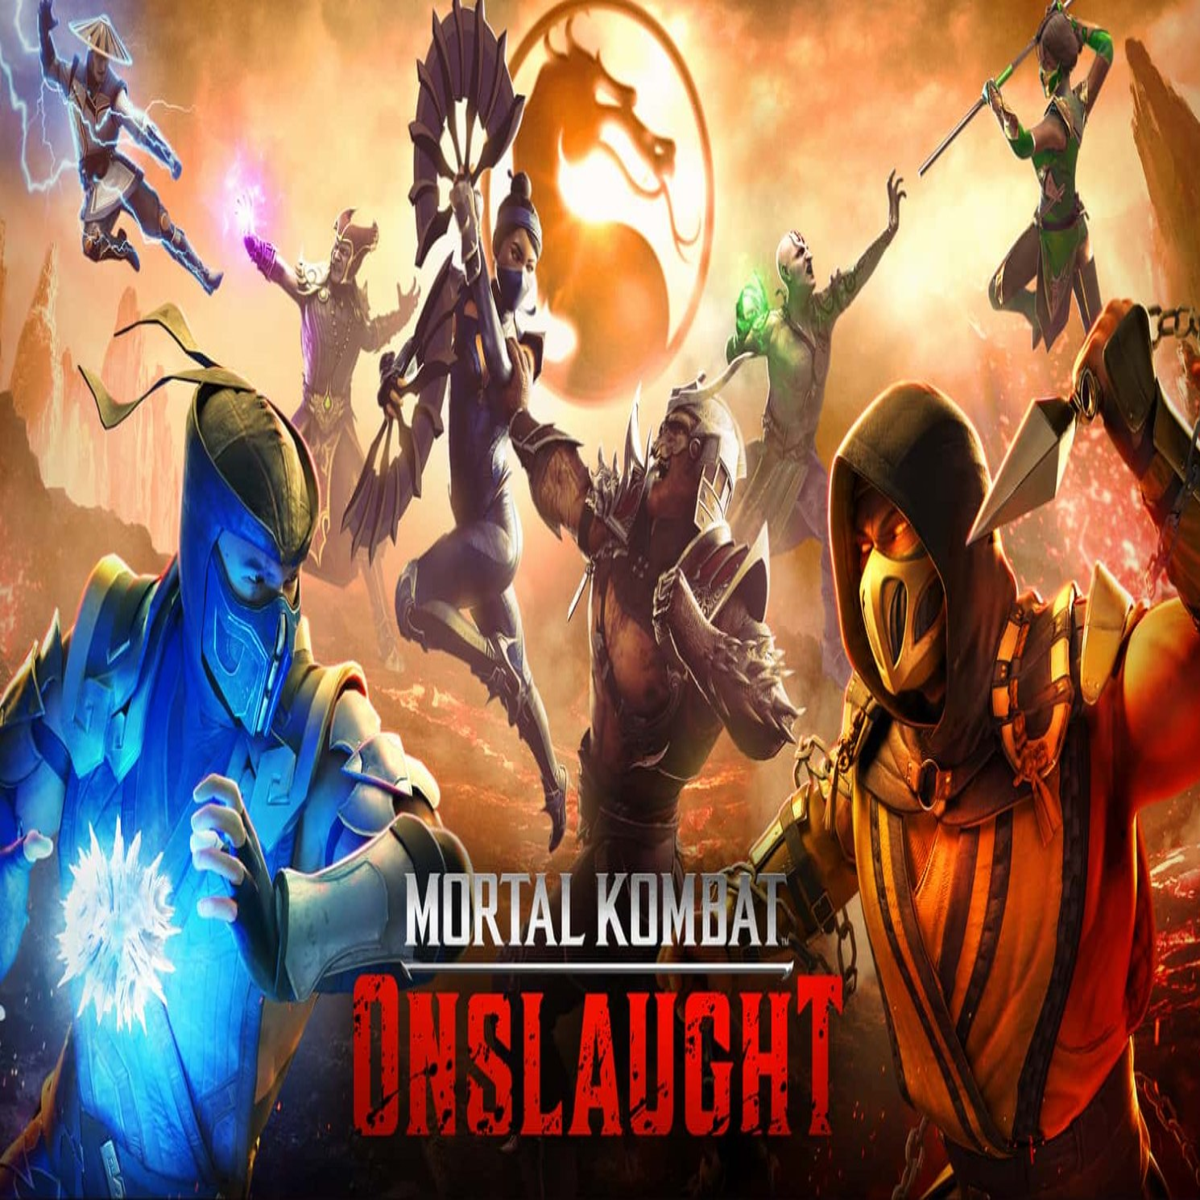 Mortal Kombat: Onslaught is a new mobile game coming in 2023